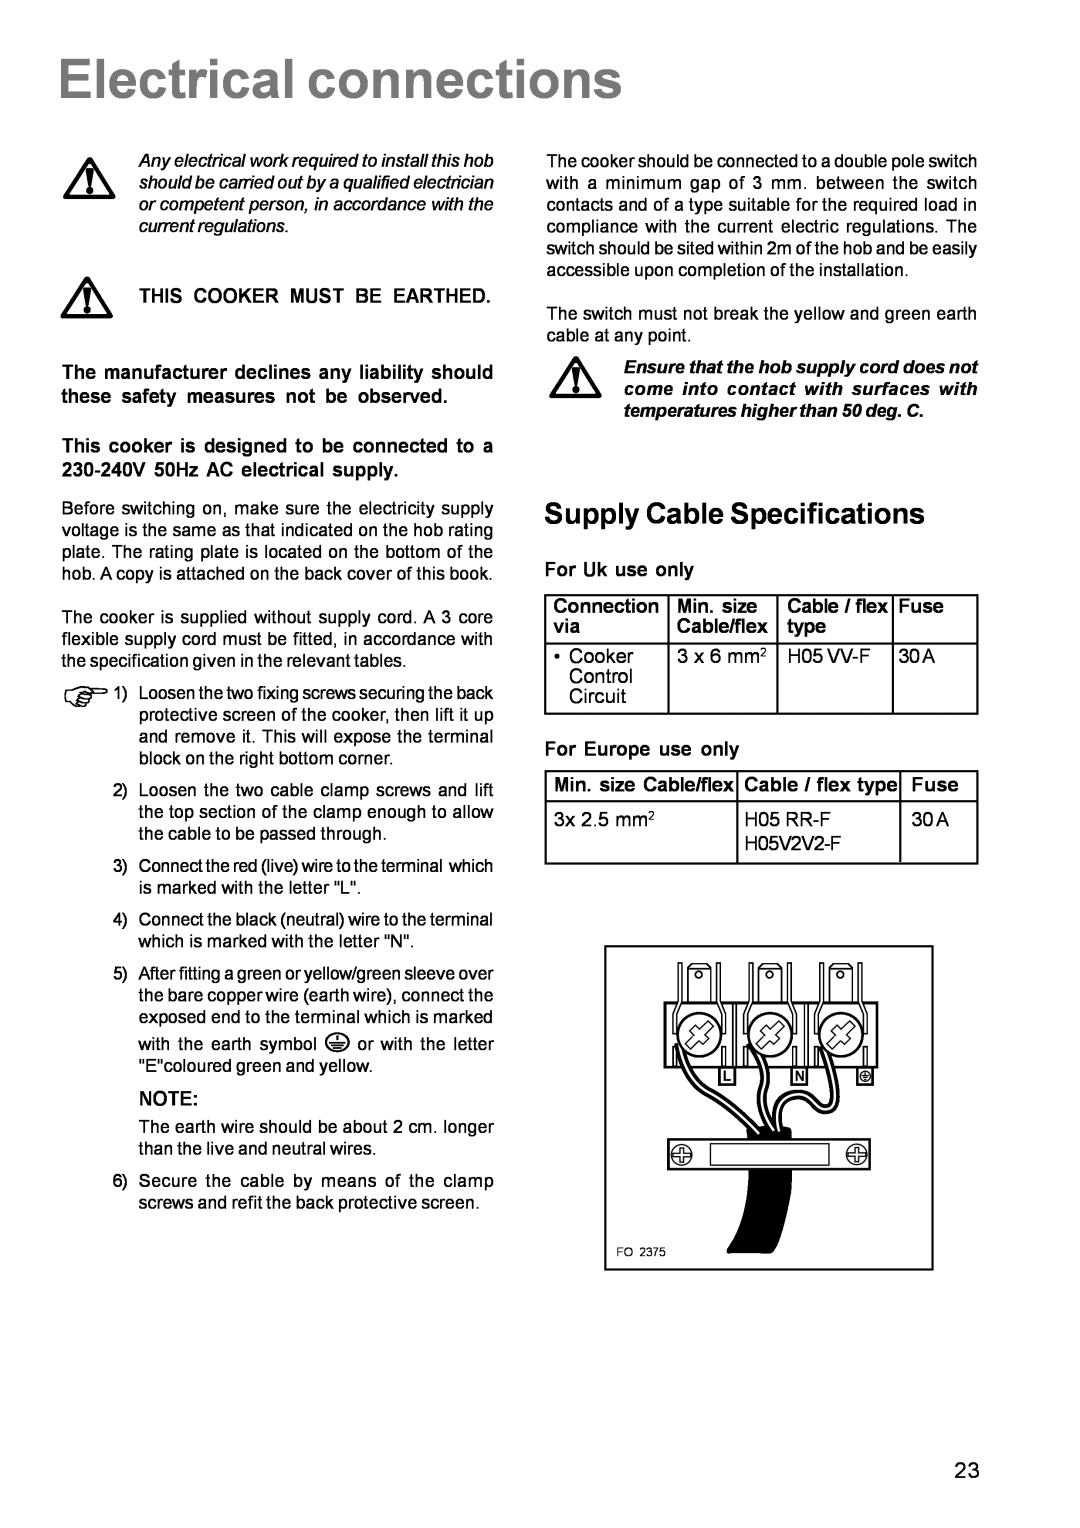 Zanussi ZCE 630 manual Electrical connections, Supply Cable Specifications 